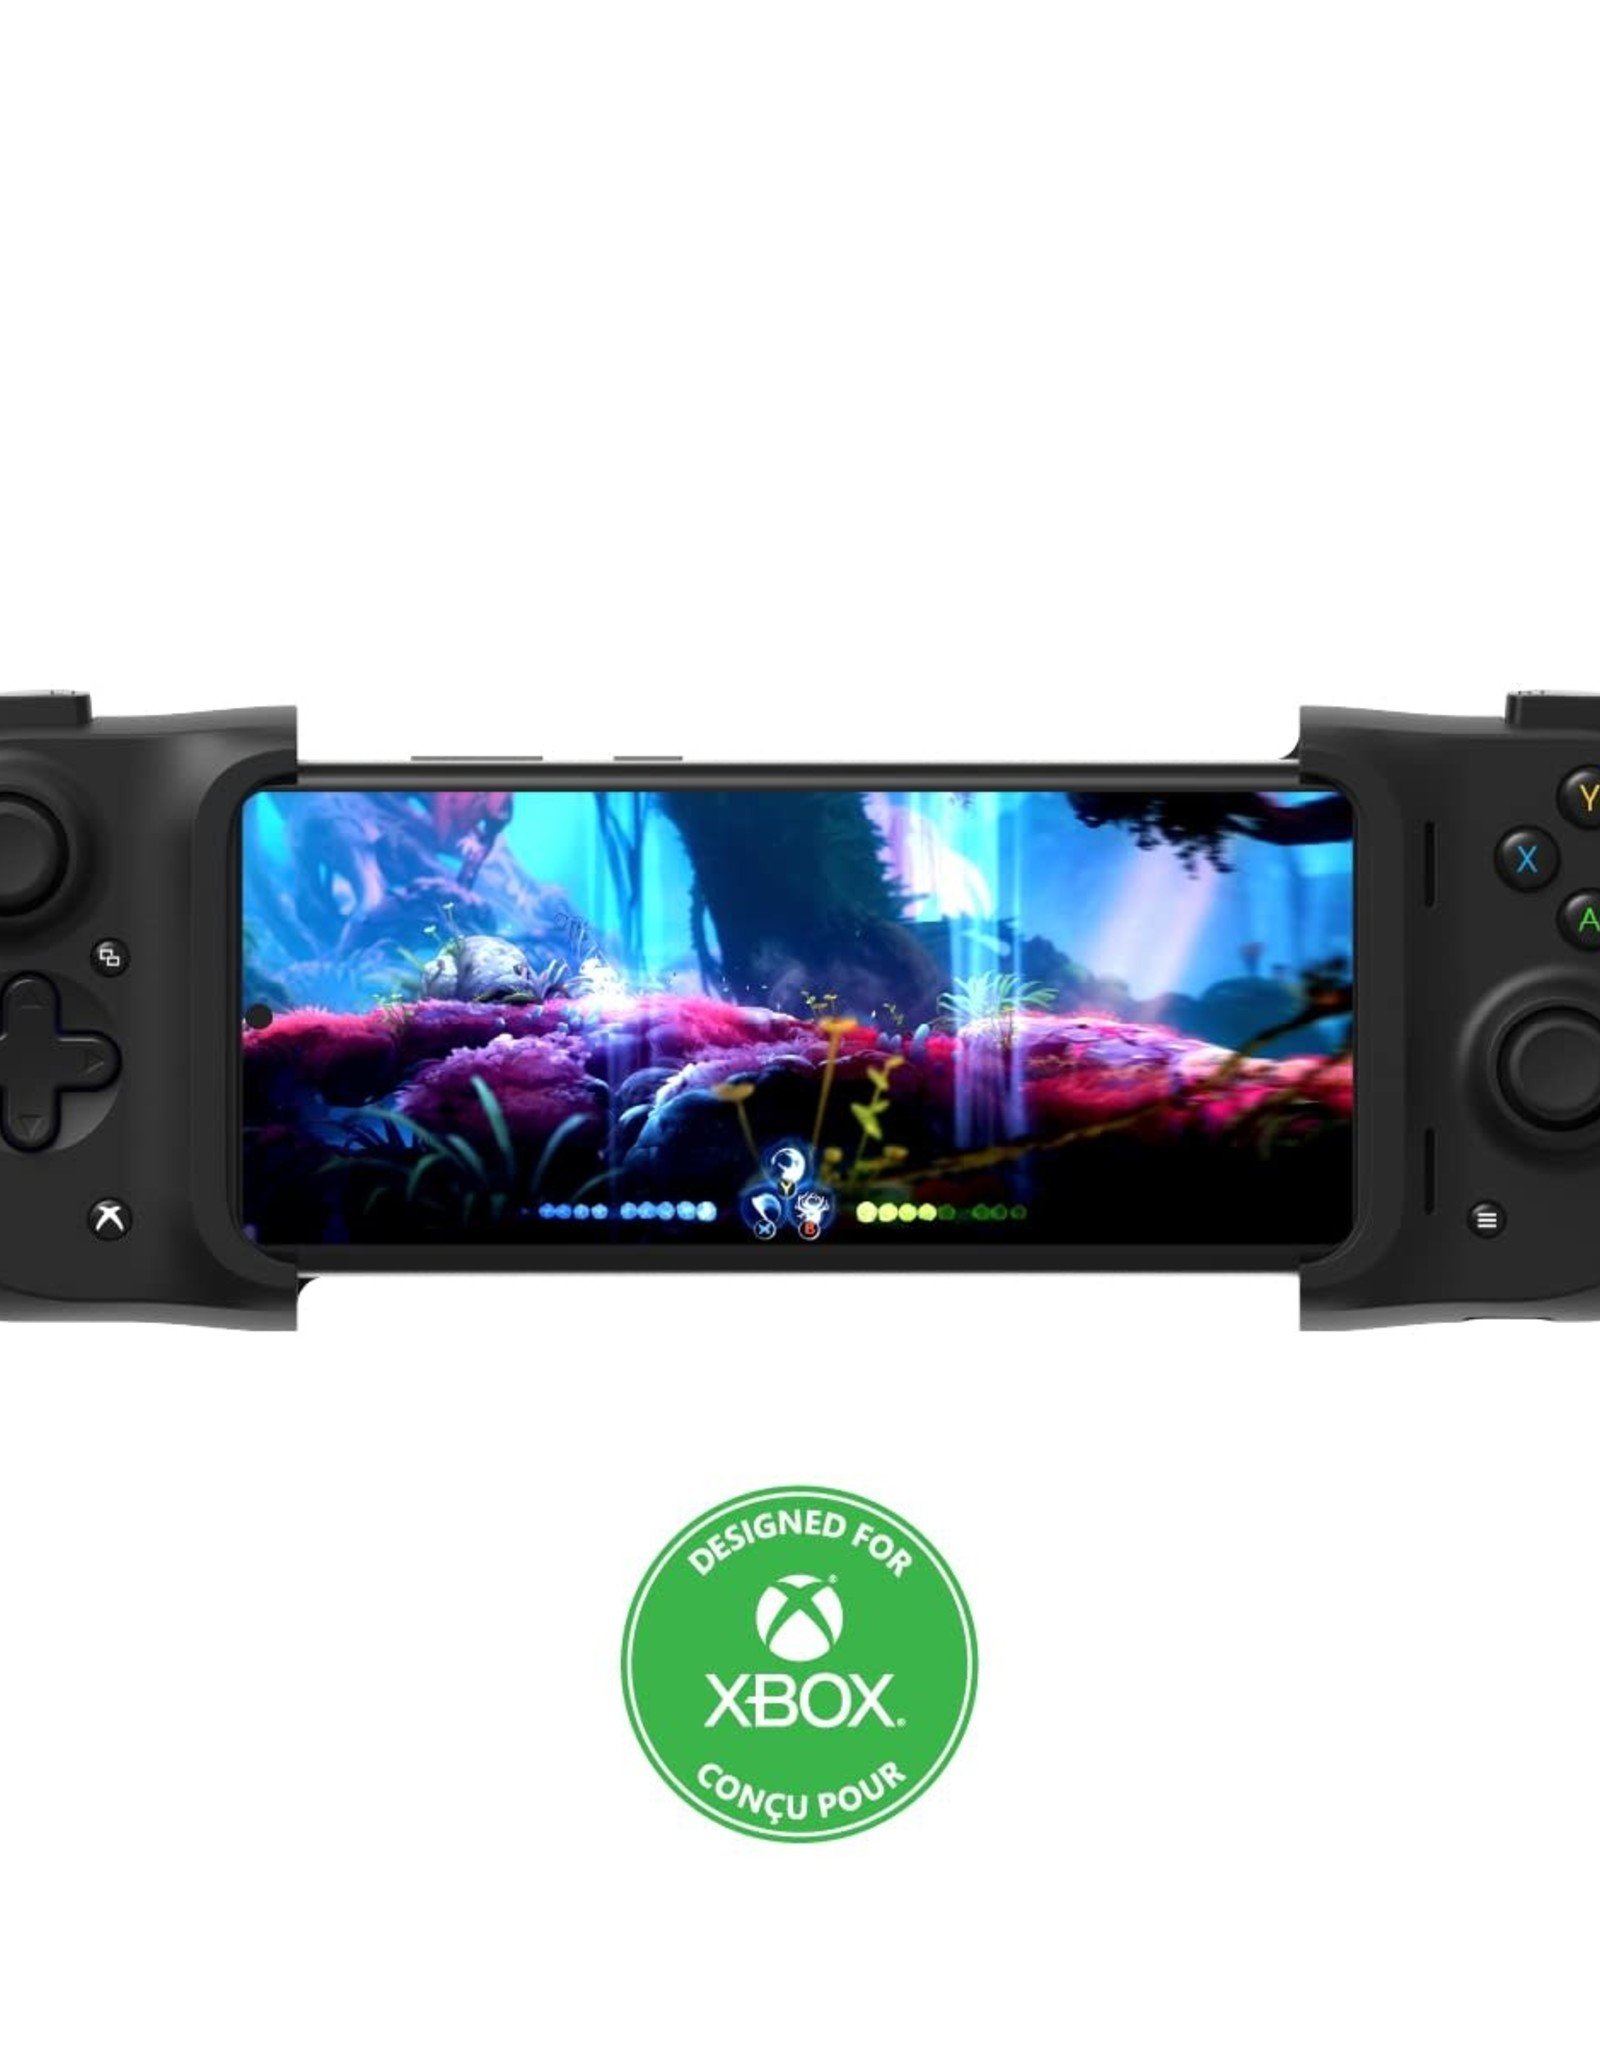 Razer Kishi Universal Mobile Gaming Controller for Android (Xbox)